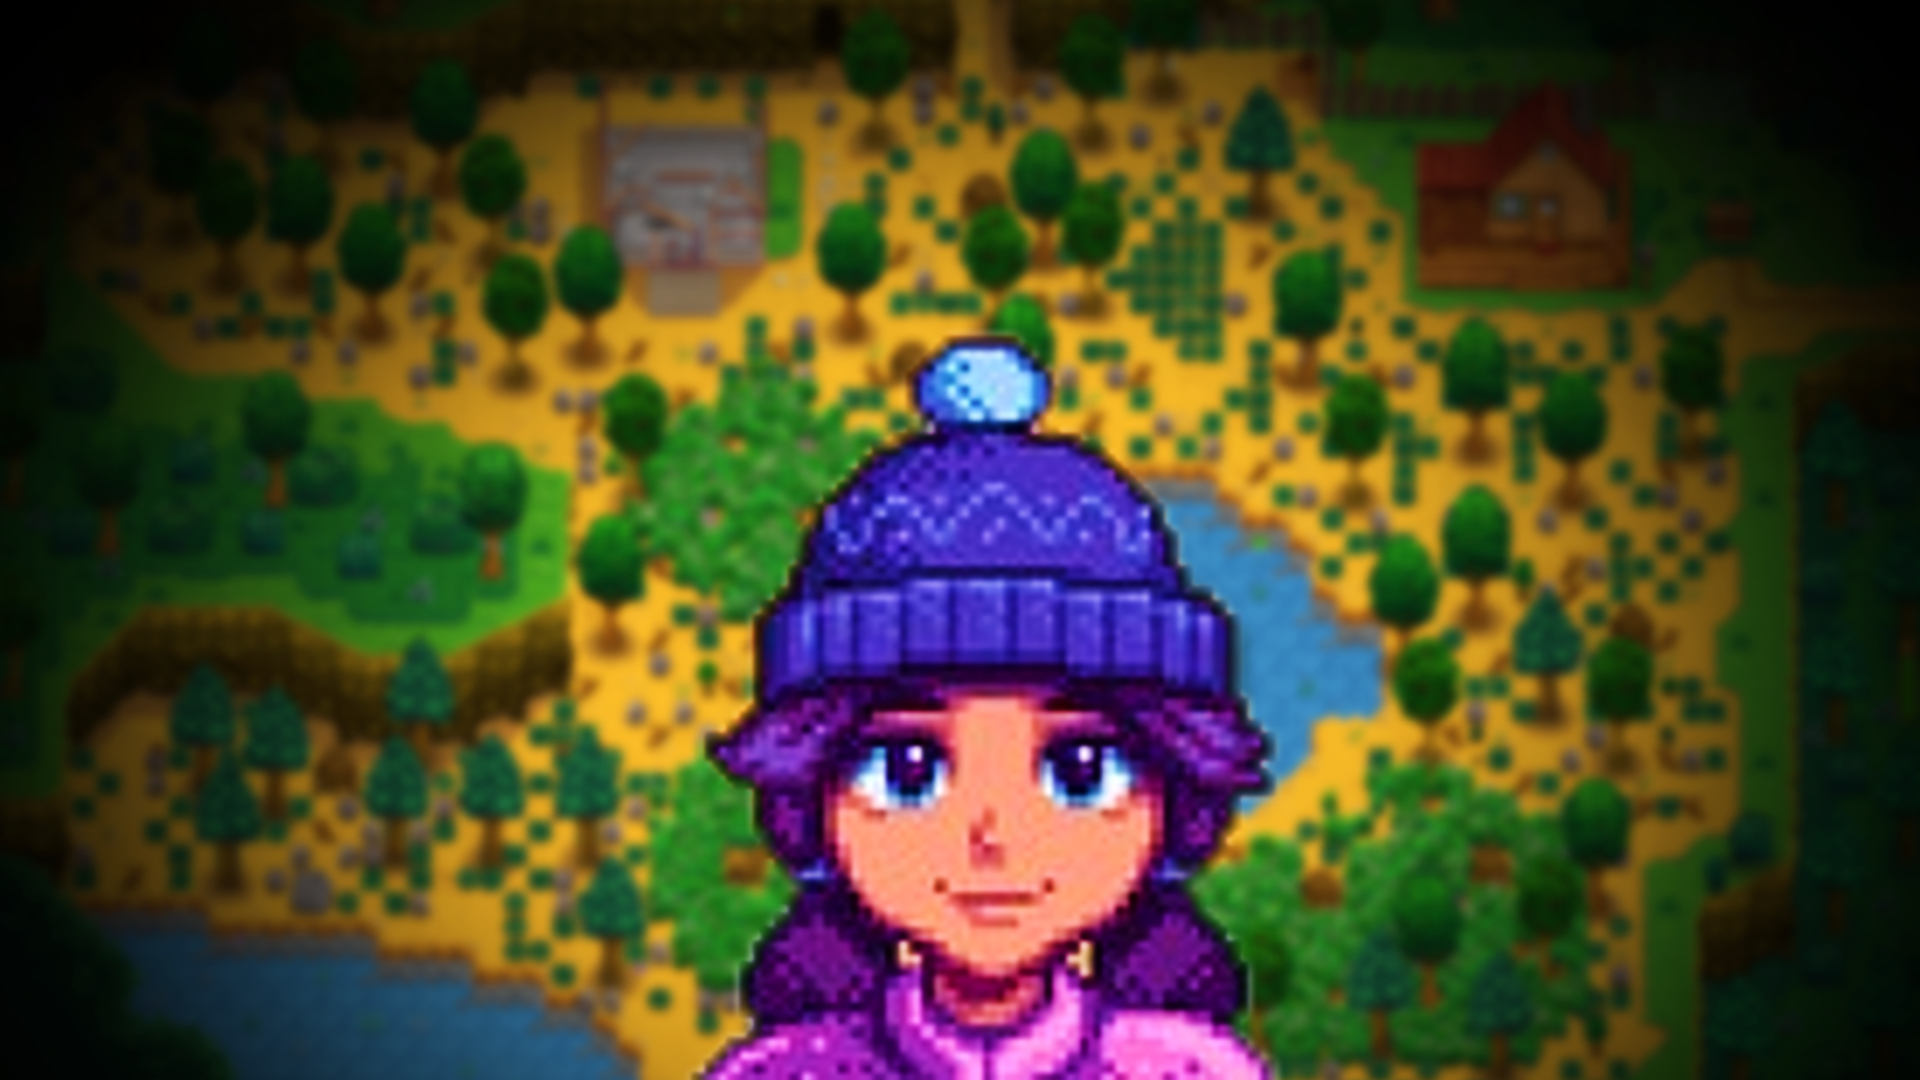 Stardew Valley Multiplayer Update Hits The Farm This August